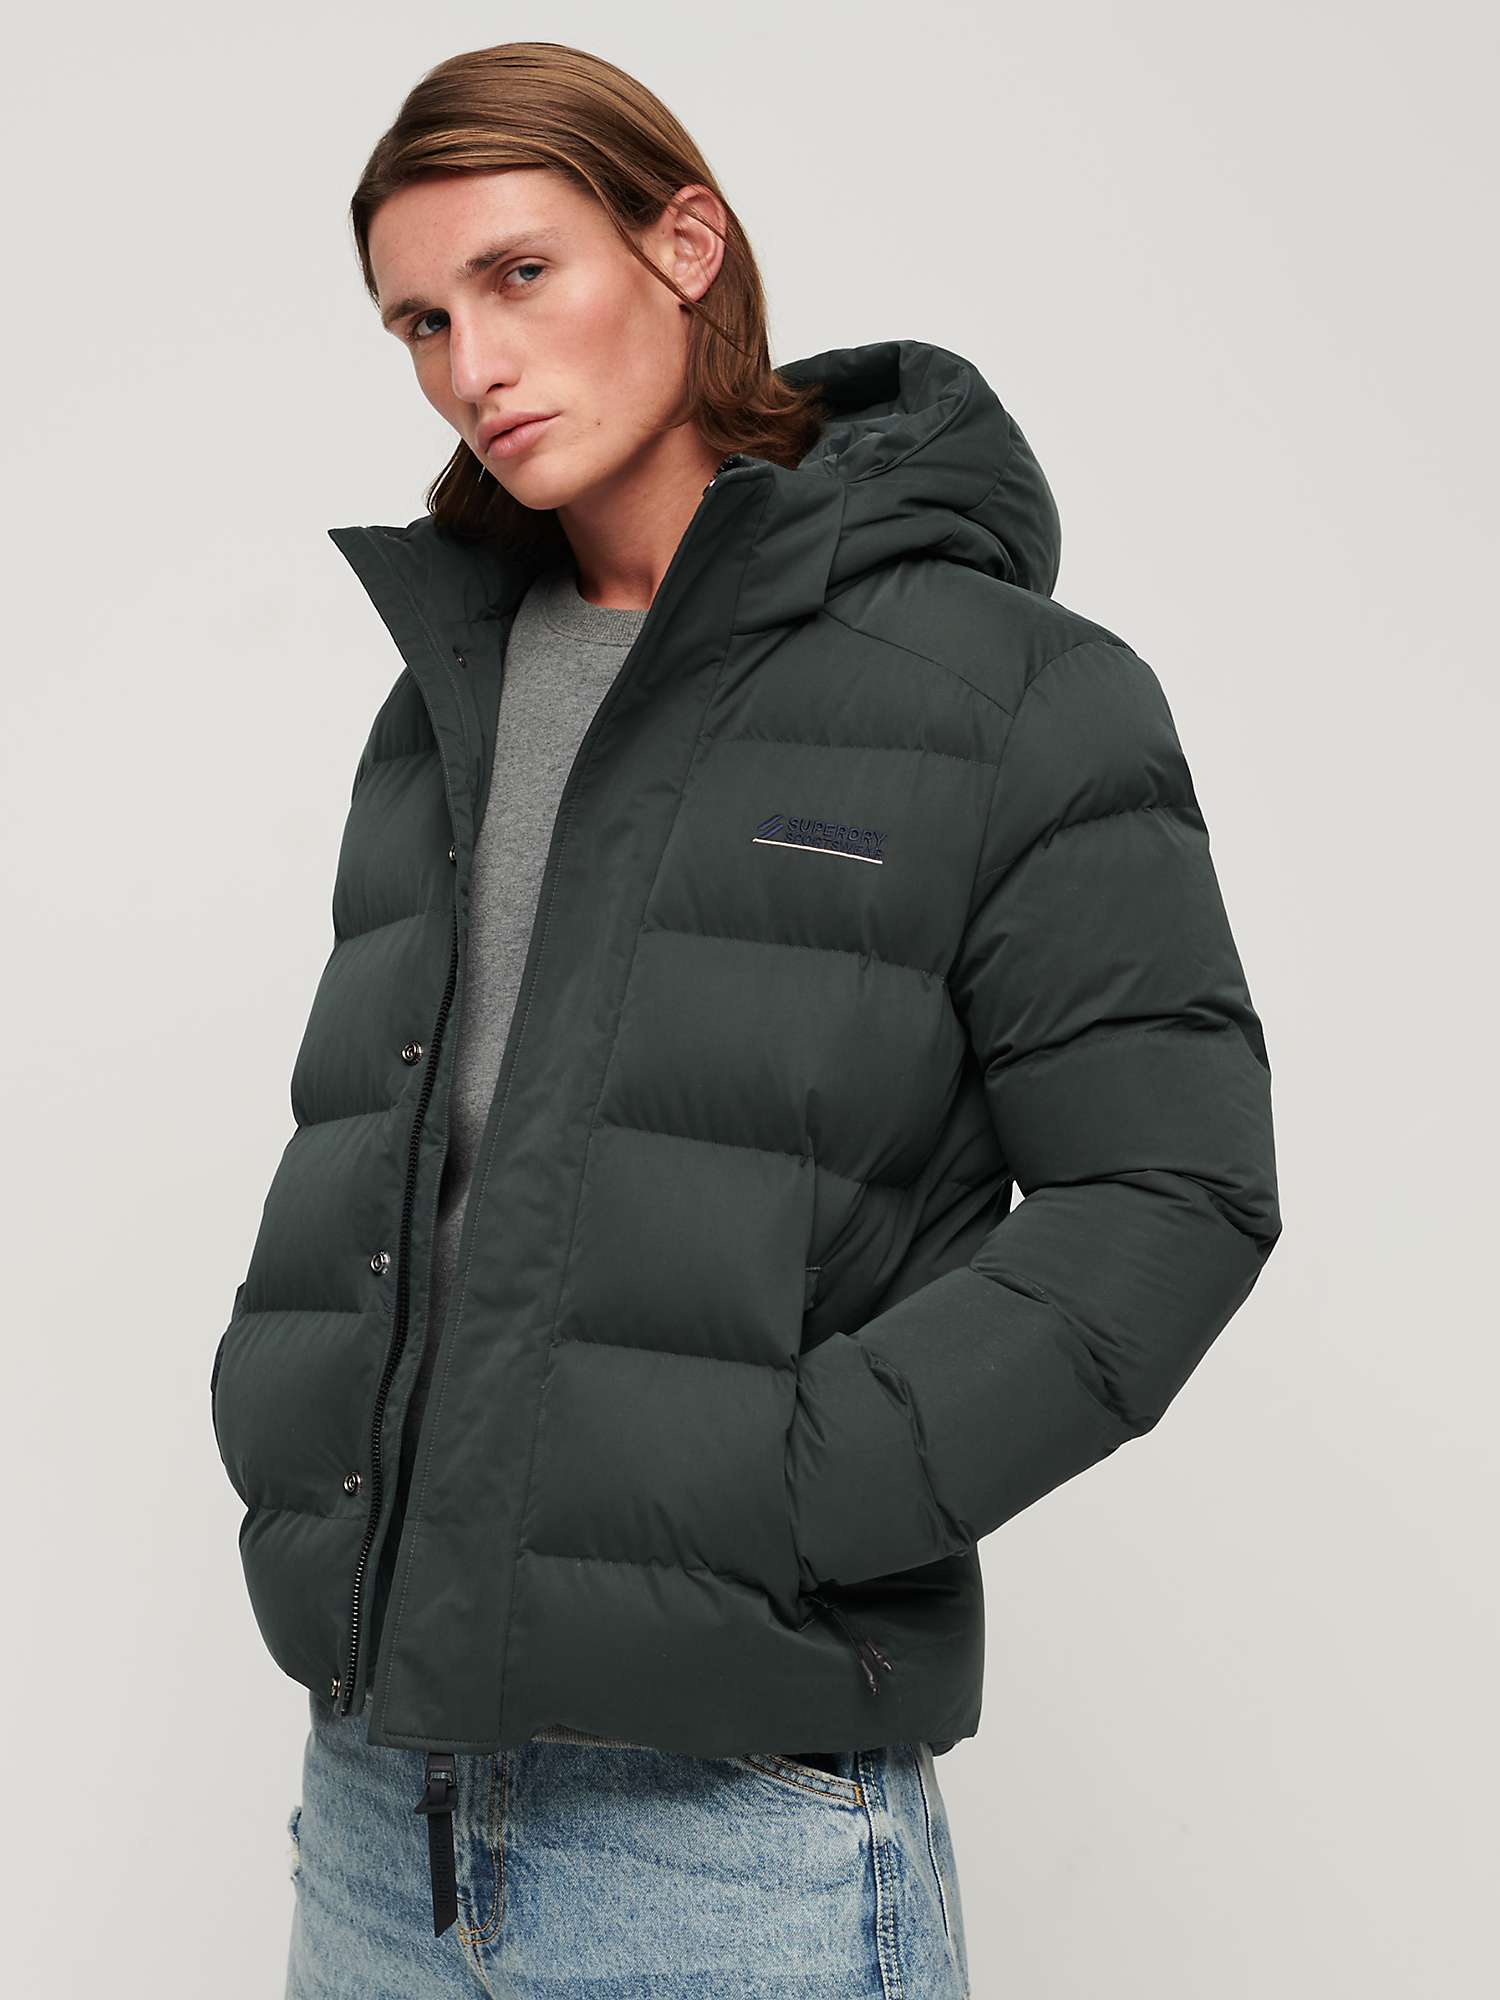 Buy Superdry Hooded Microfibre Sports Puffer Jacket Online at johnlewis.com